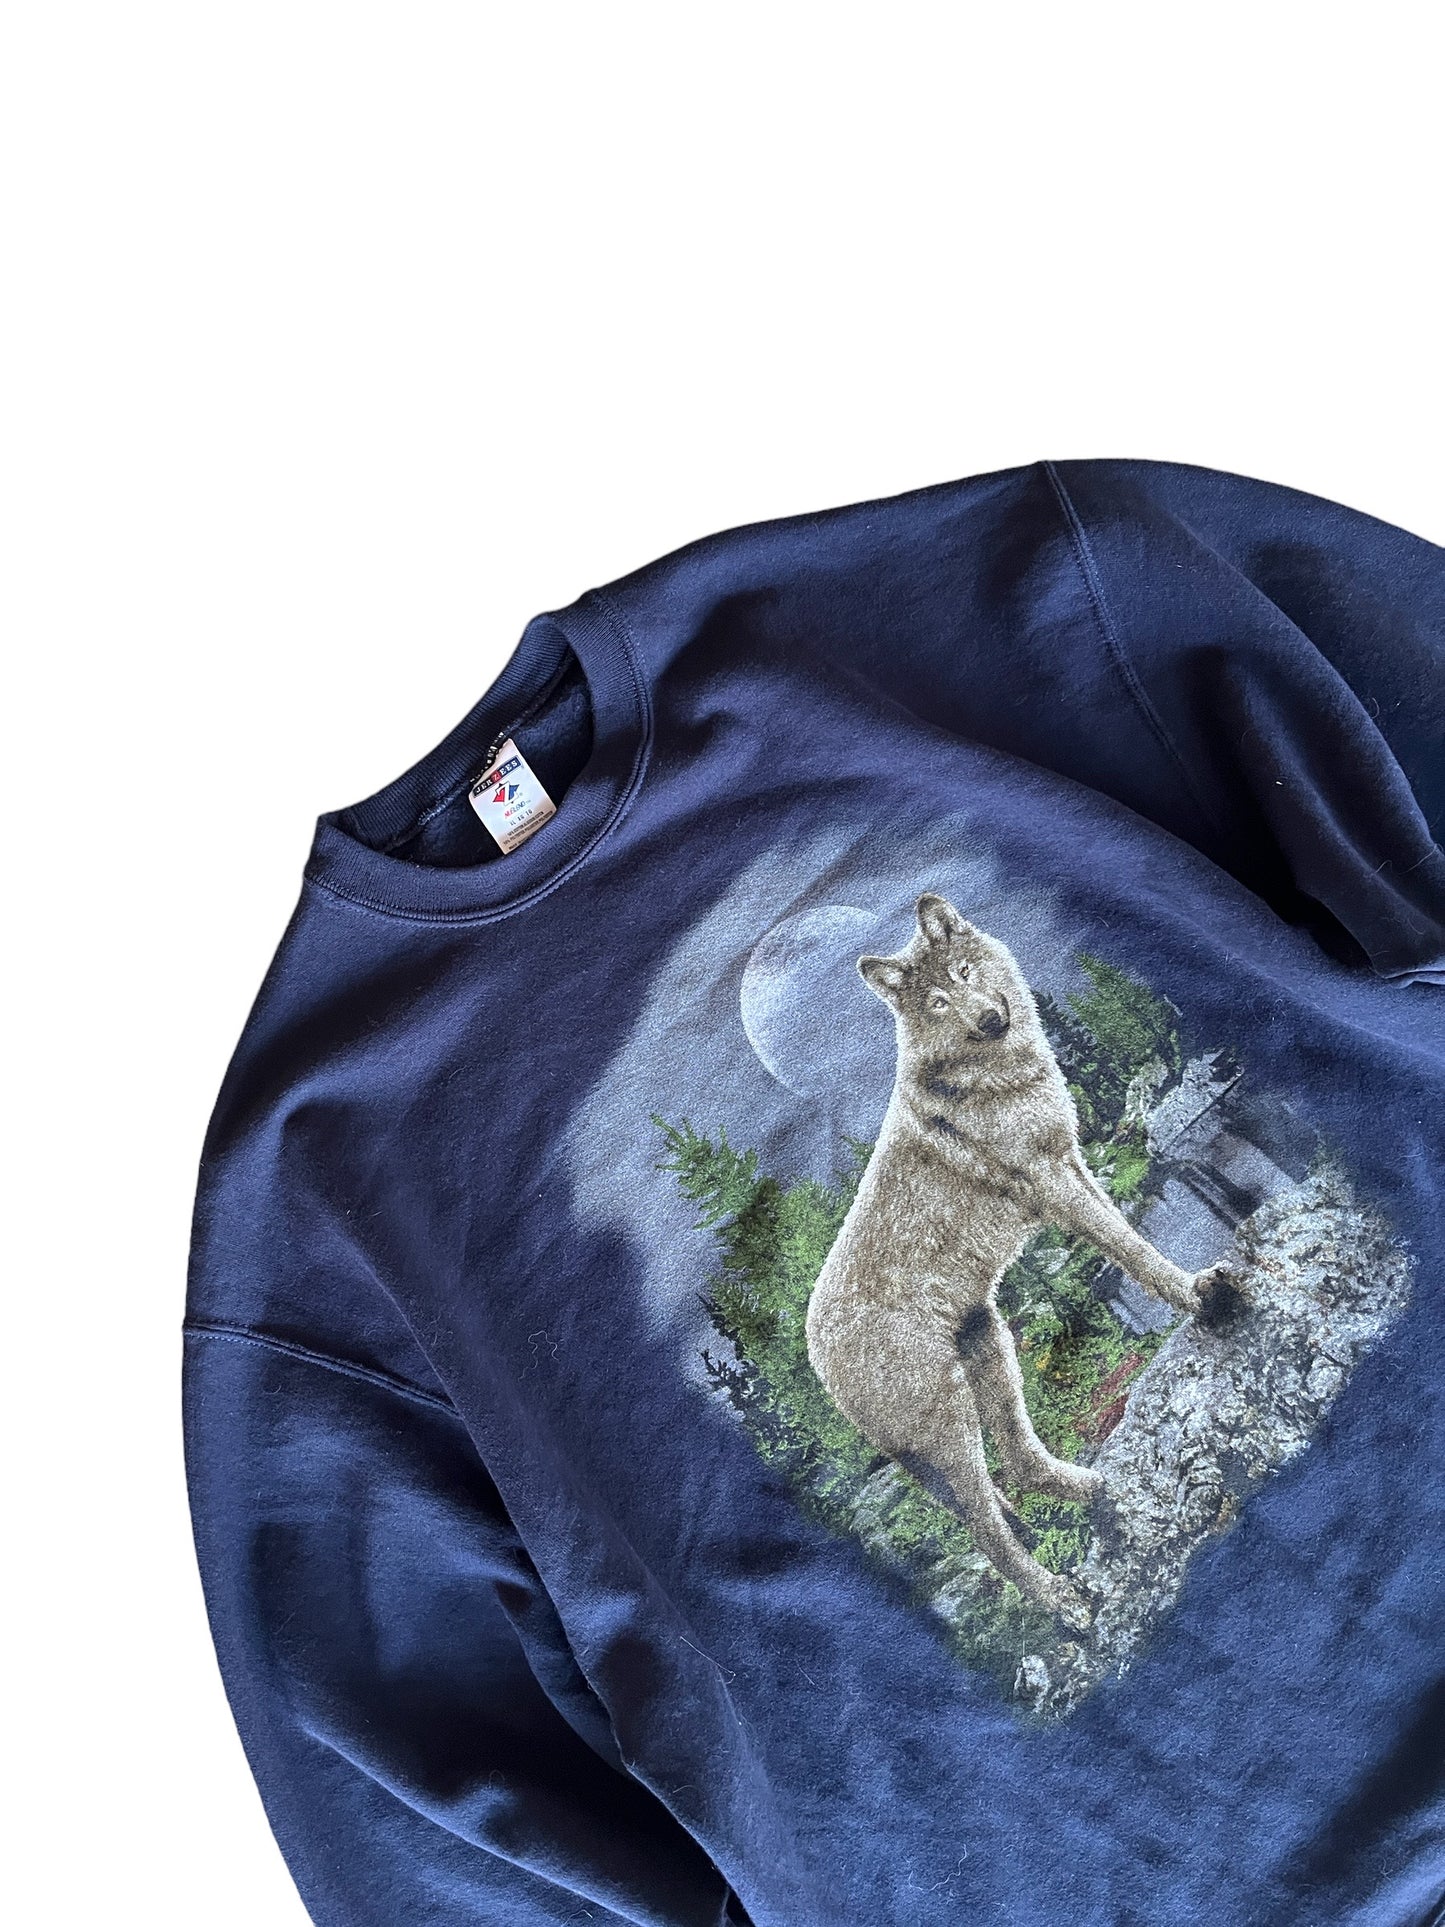 Vintage Nature Wolf Sweater